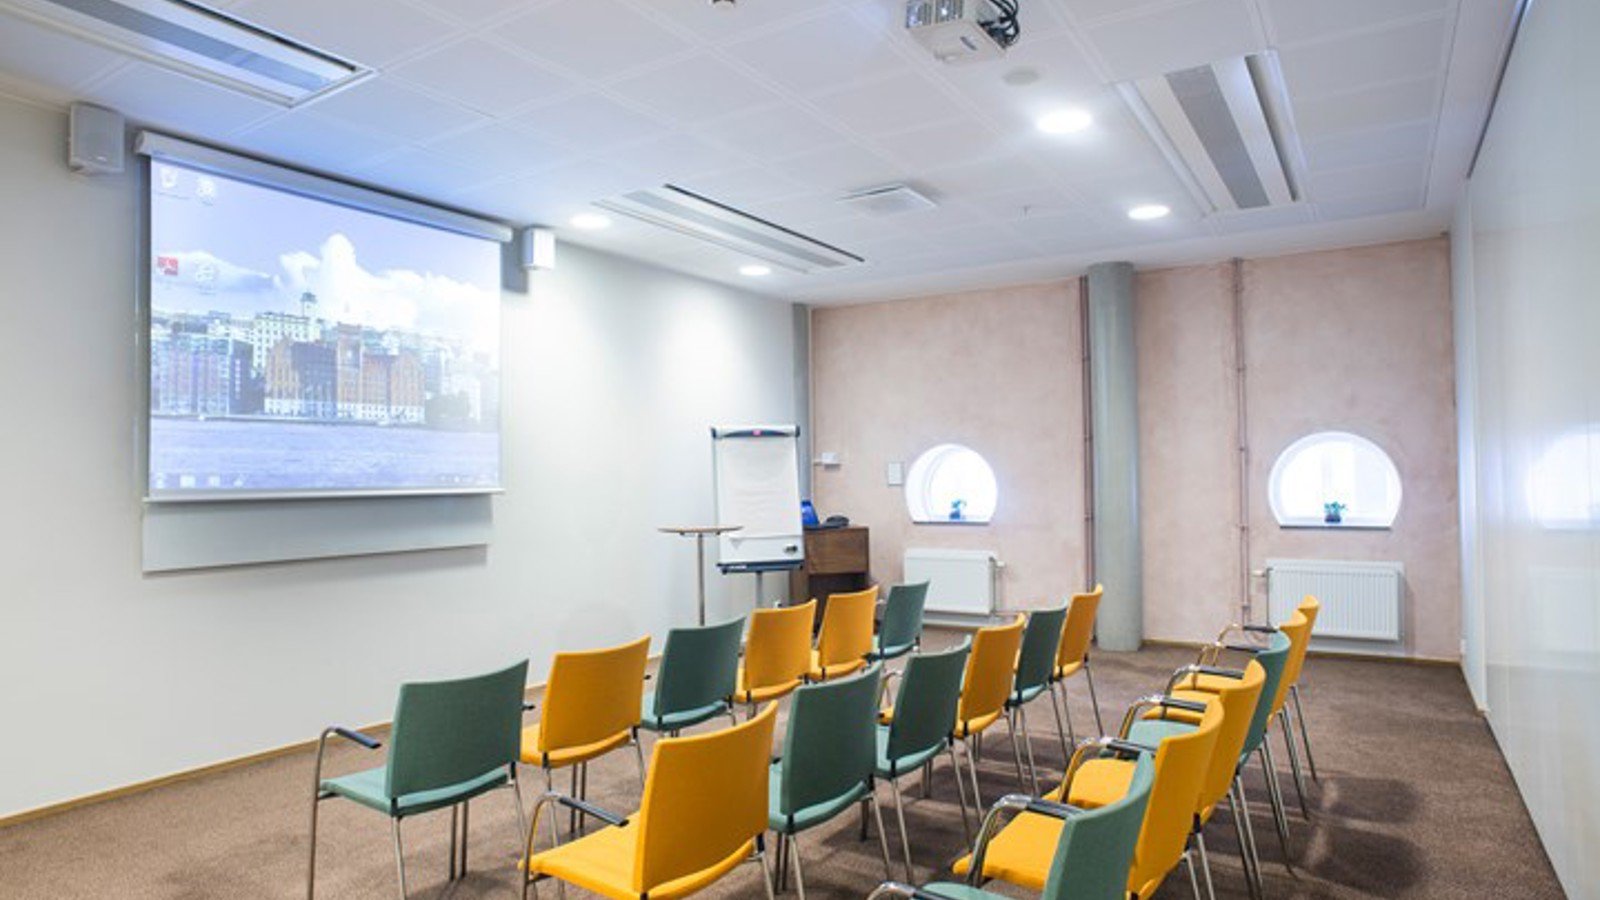 Conference room with cinema seating, yellow and blue chairs, white walls and a projector